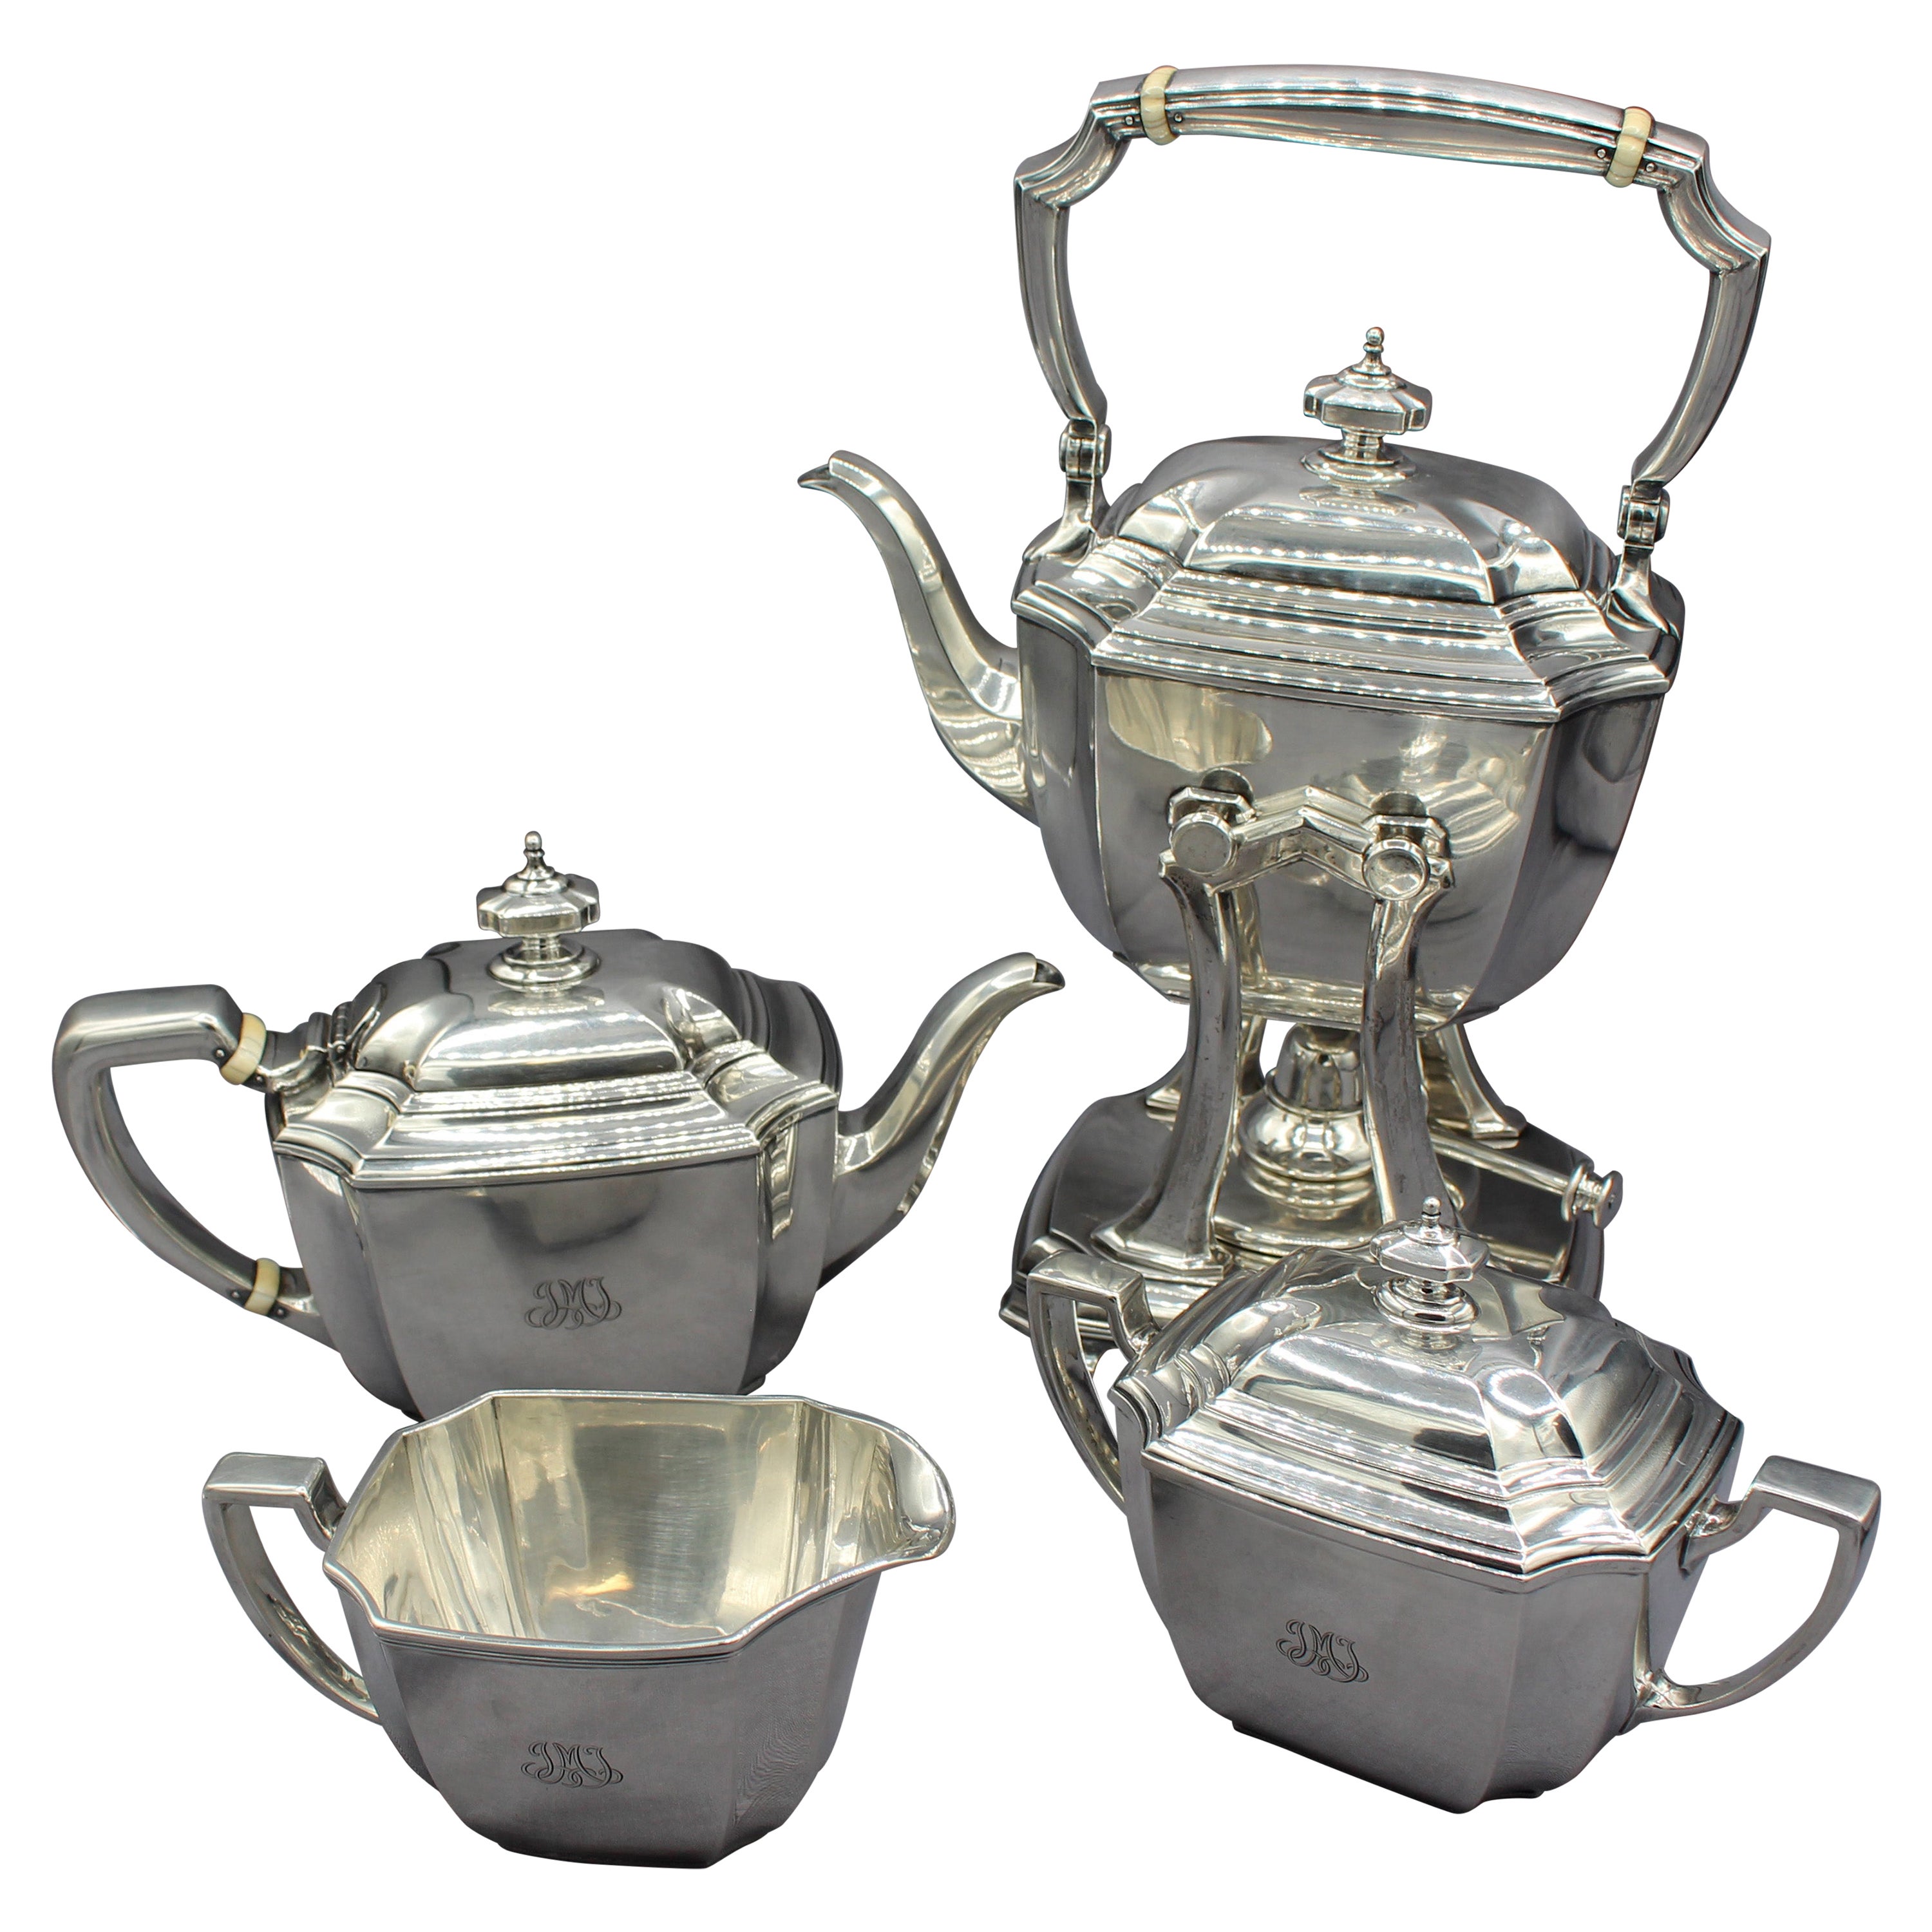 c. 1920s-30s 4-Piece Sterling Silver Tea Service by Tiffany For Sale